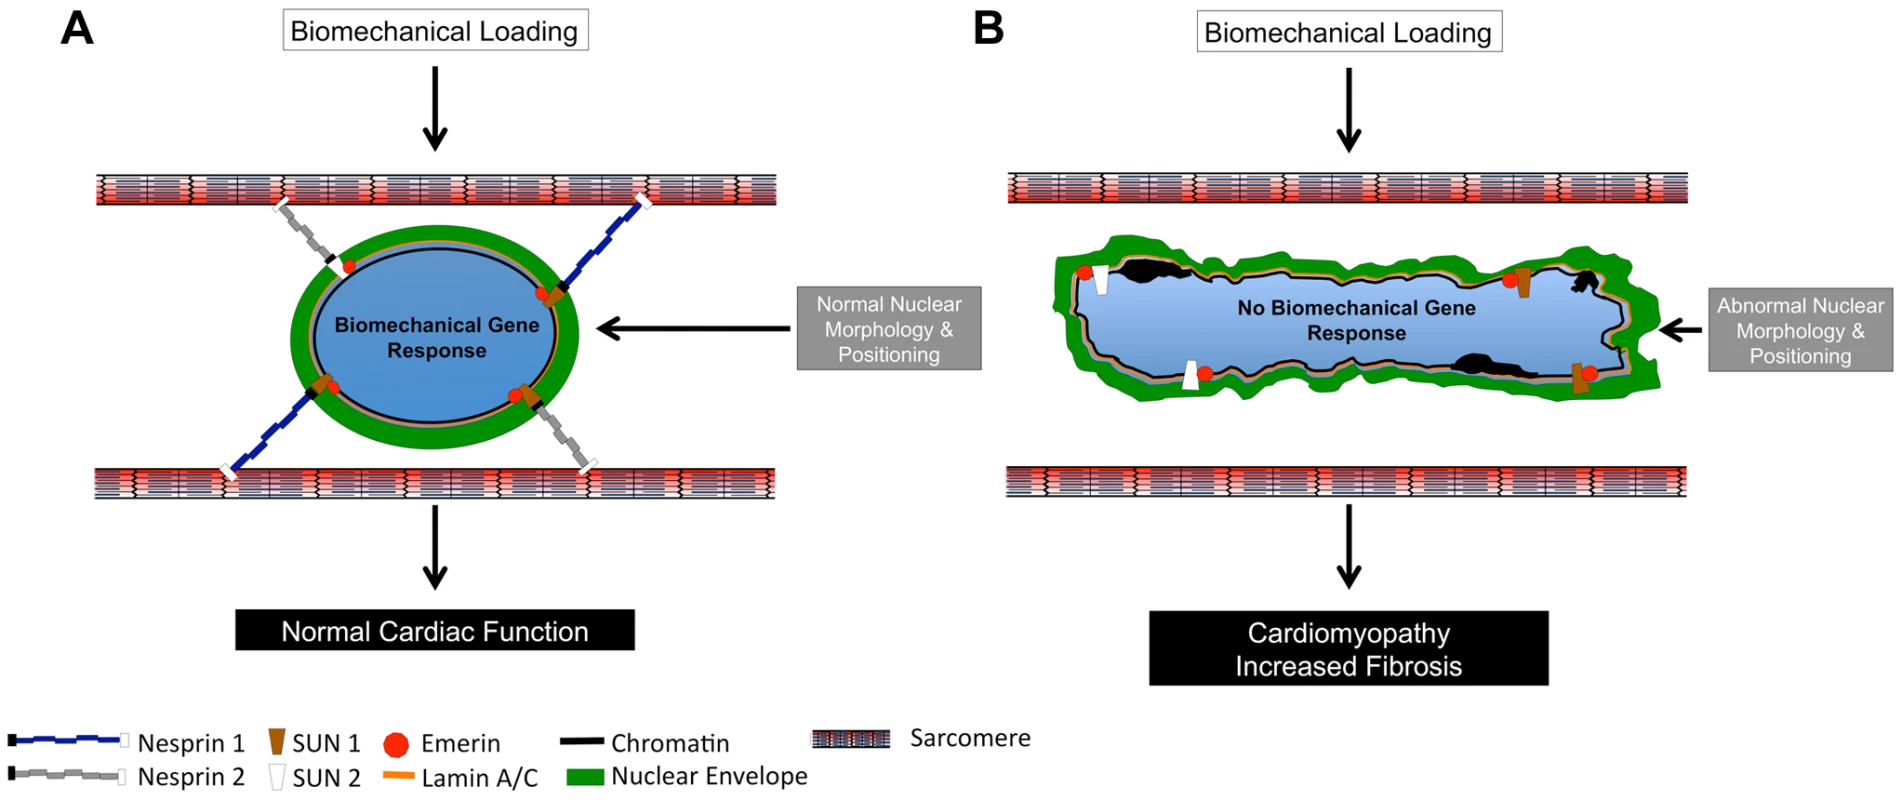 Model of Nesprin 1 and/or 2 loss in cardiomyocytes.